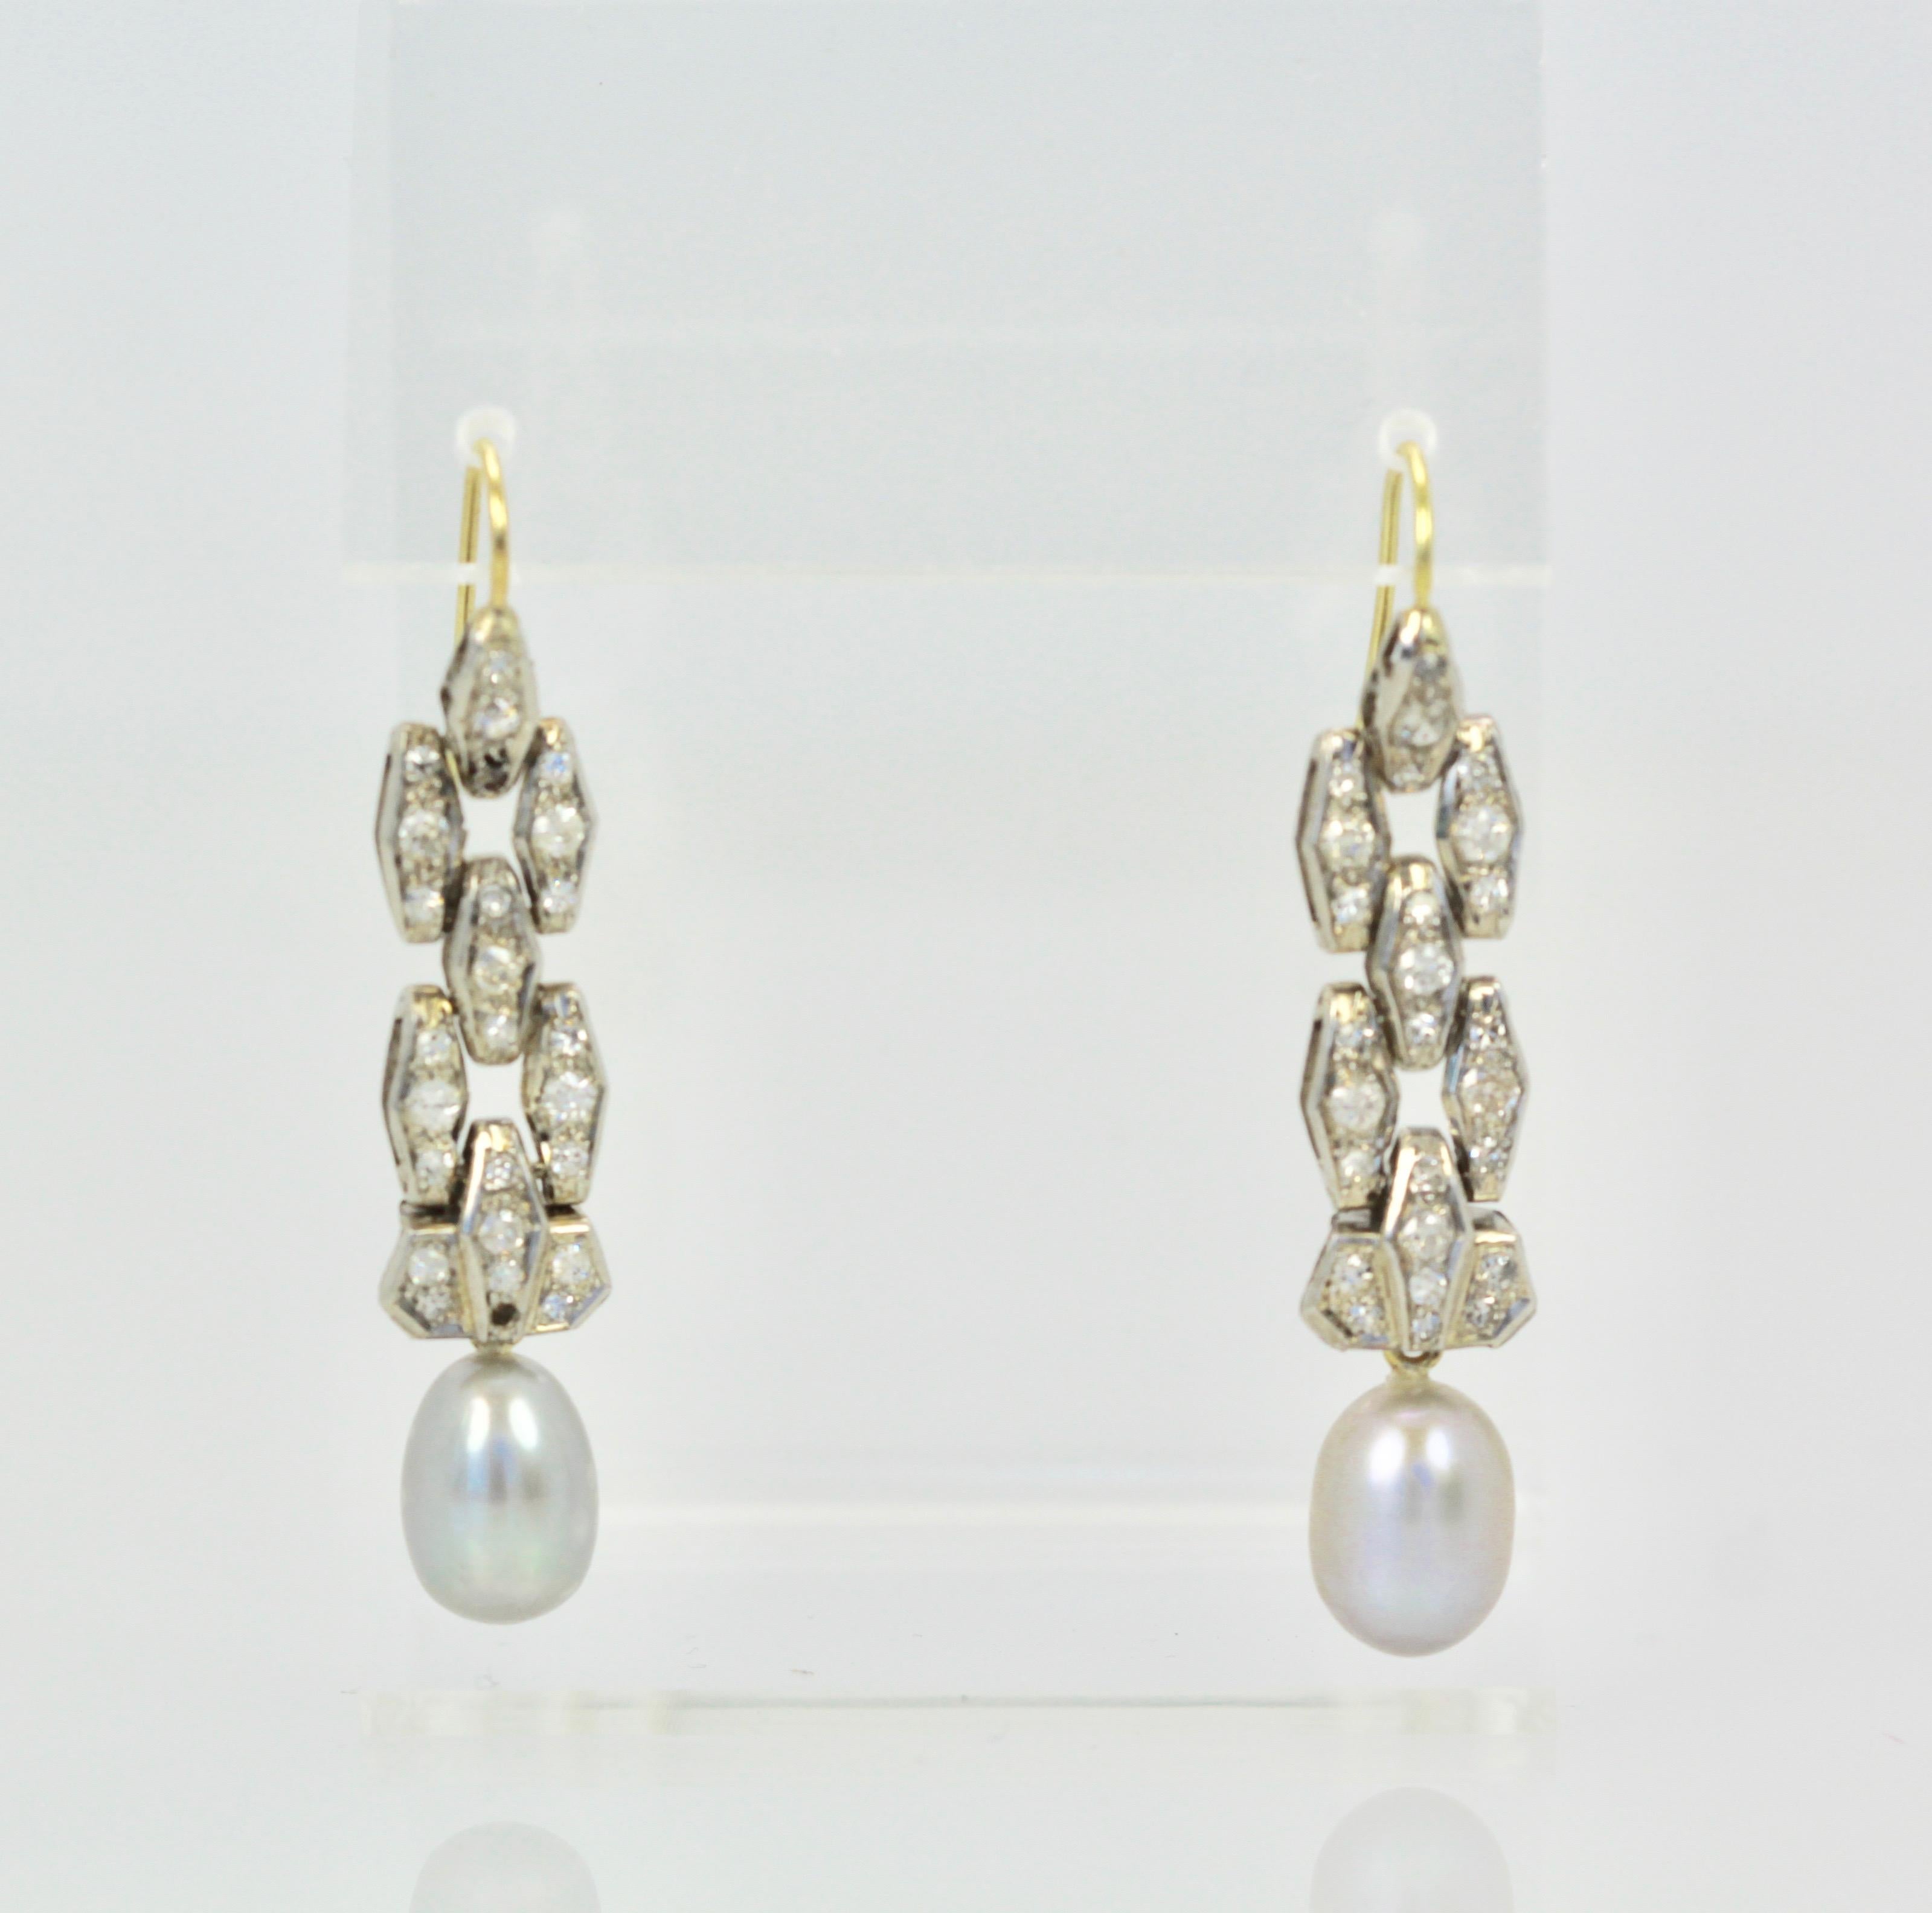 These lovely Deco Diamond Pearl Drop earrings come from Ireland and are 1 cm wide x 4.5 cm long.  The Diamonds remind me of an old Deco bracelet or parts from one, but I purchased these as is.  The pearls are 1.2 cm long and one is with a light tint